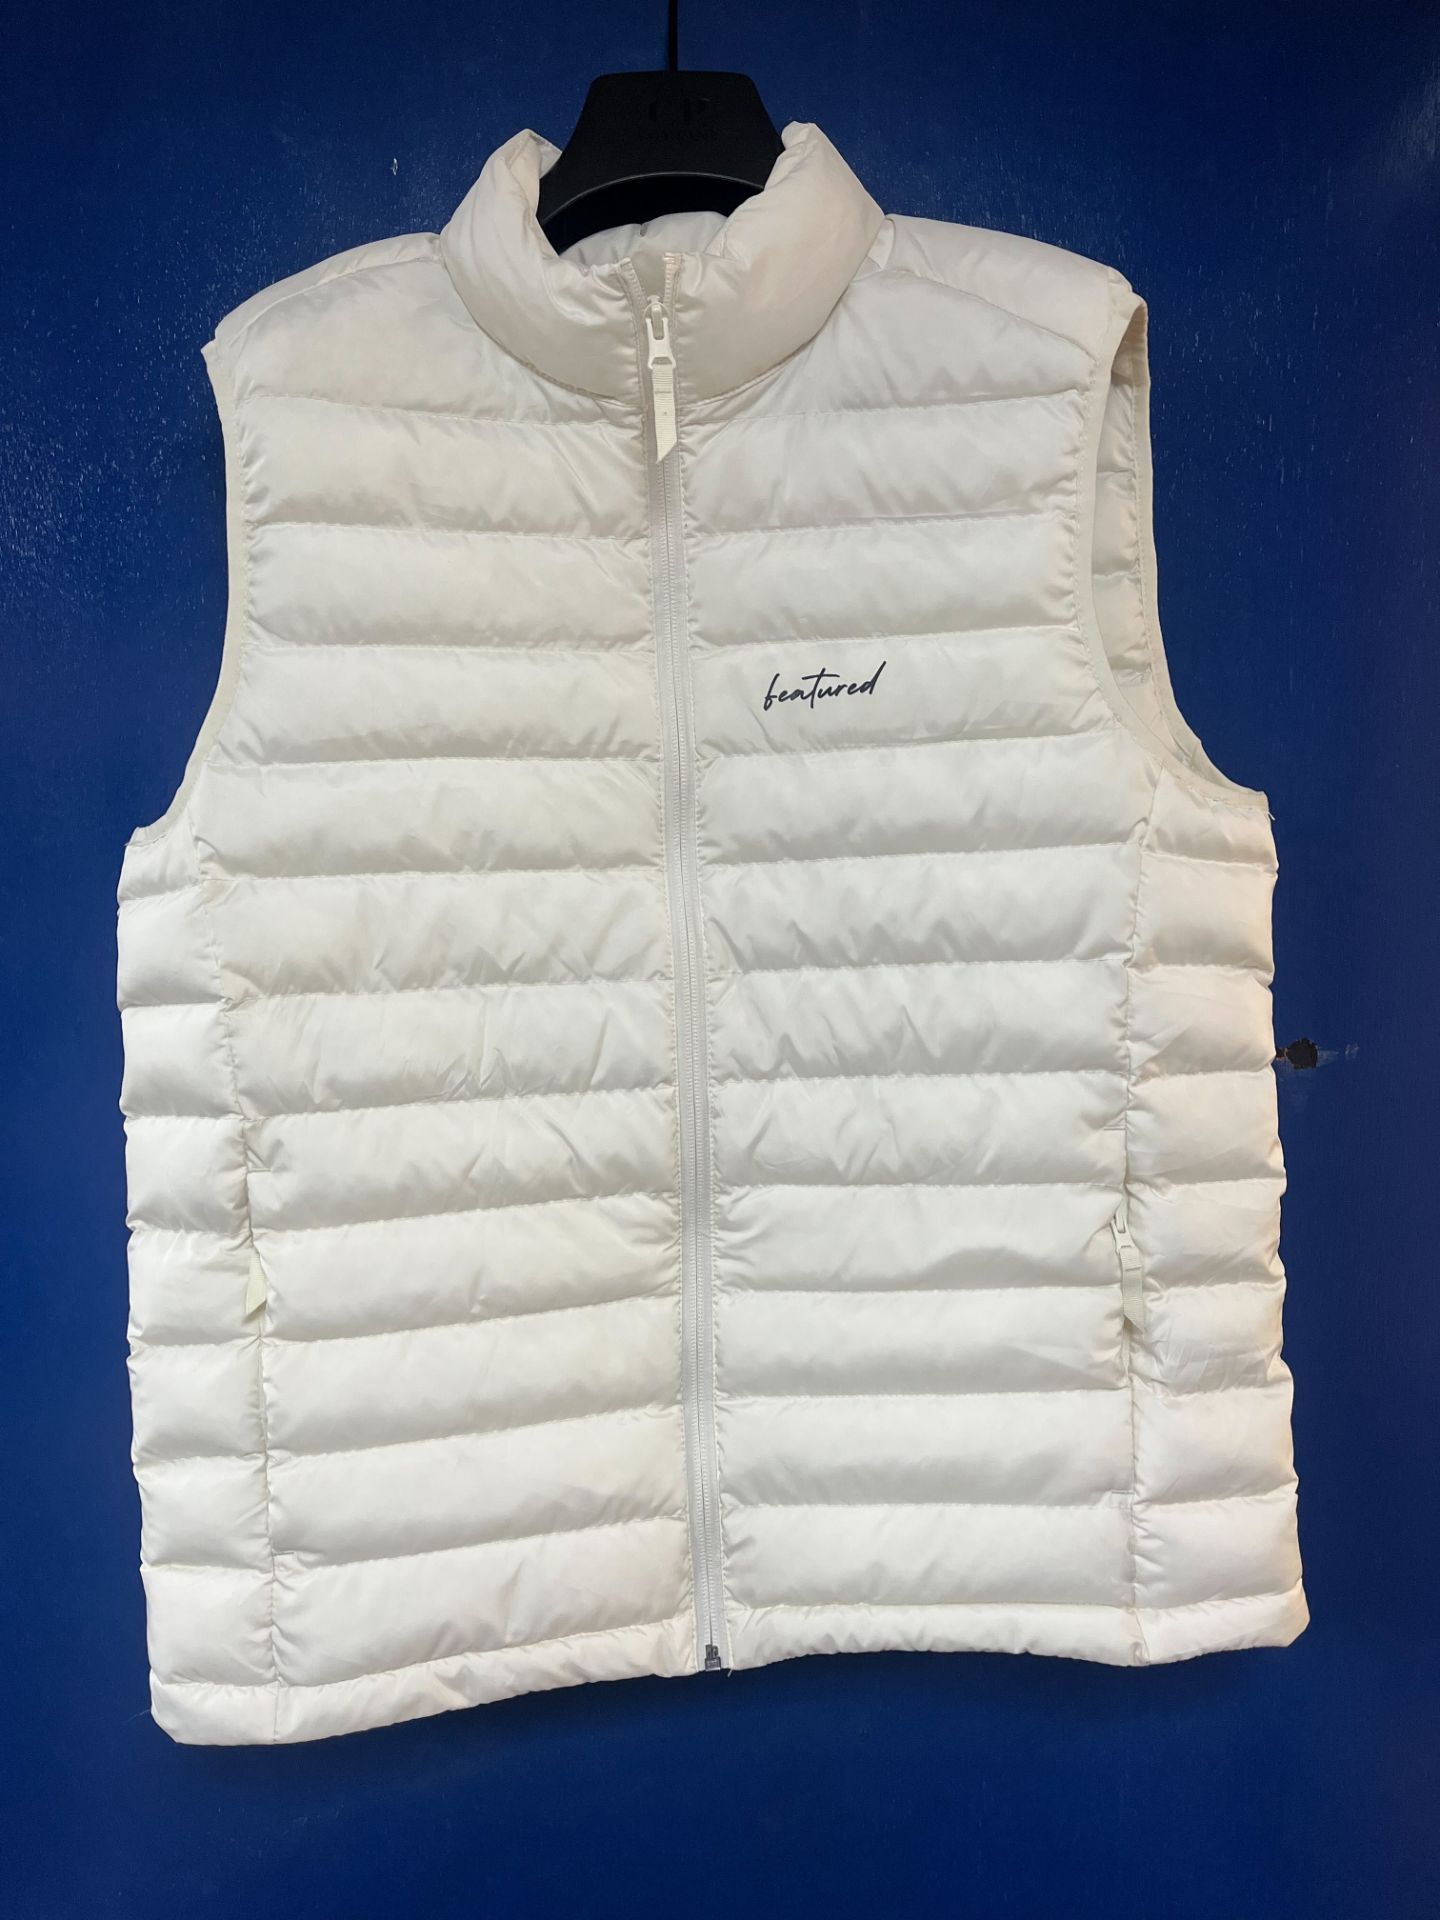 BRAND NEW FEATURED Vistar Body Warmer - Off White. SIZE LARGE. (OFC)